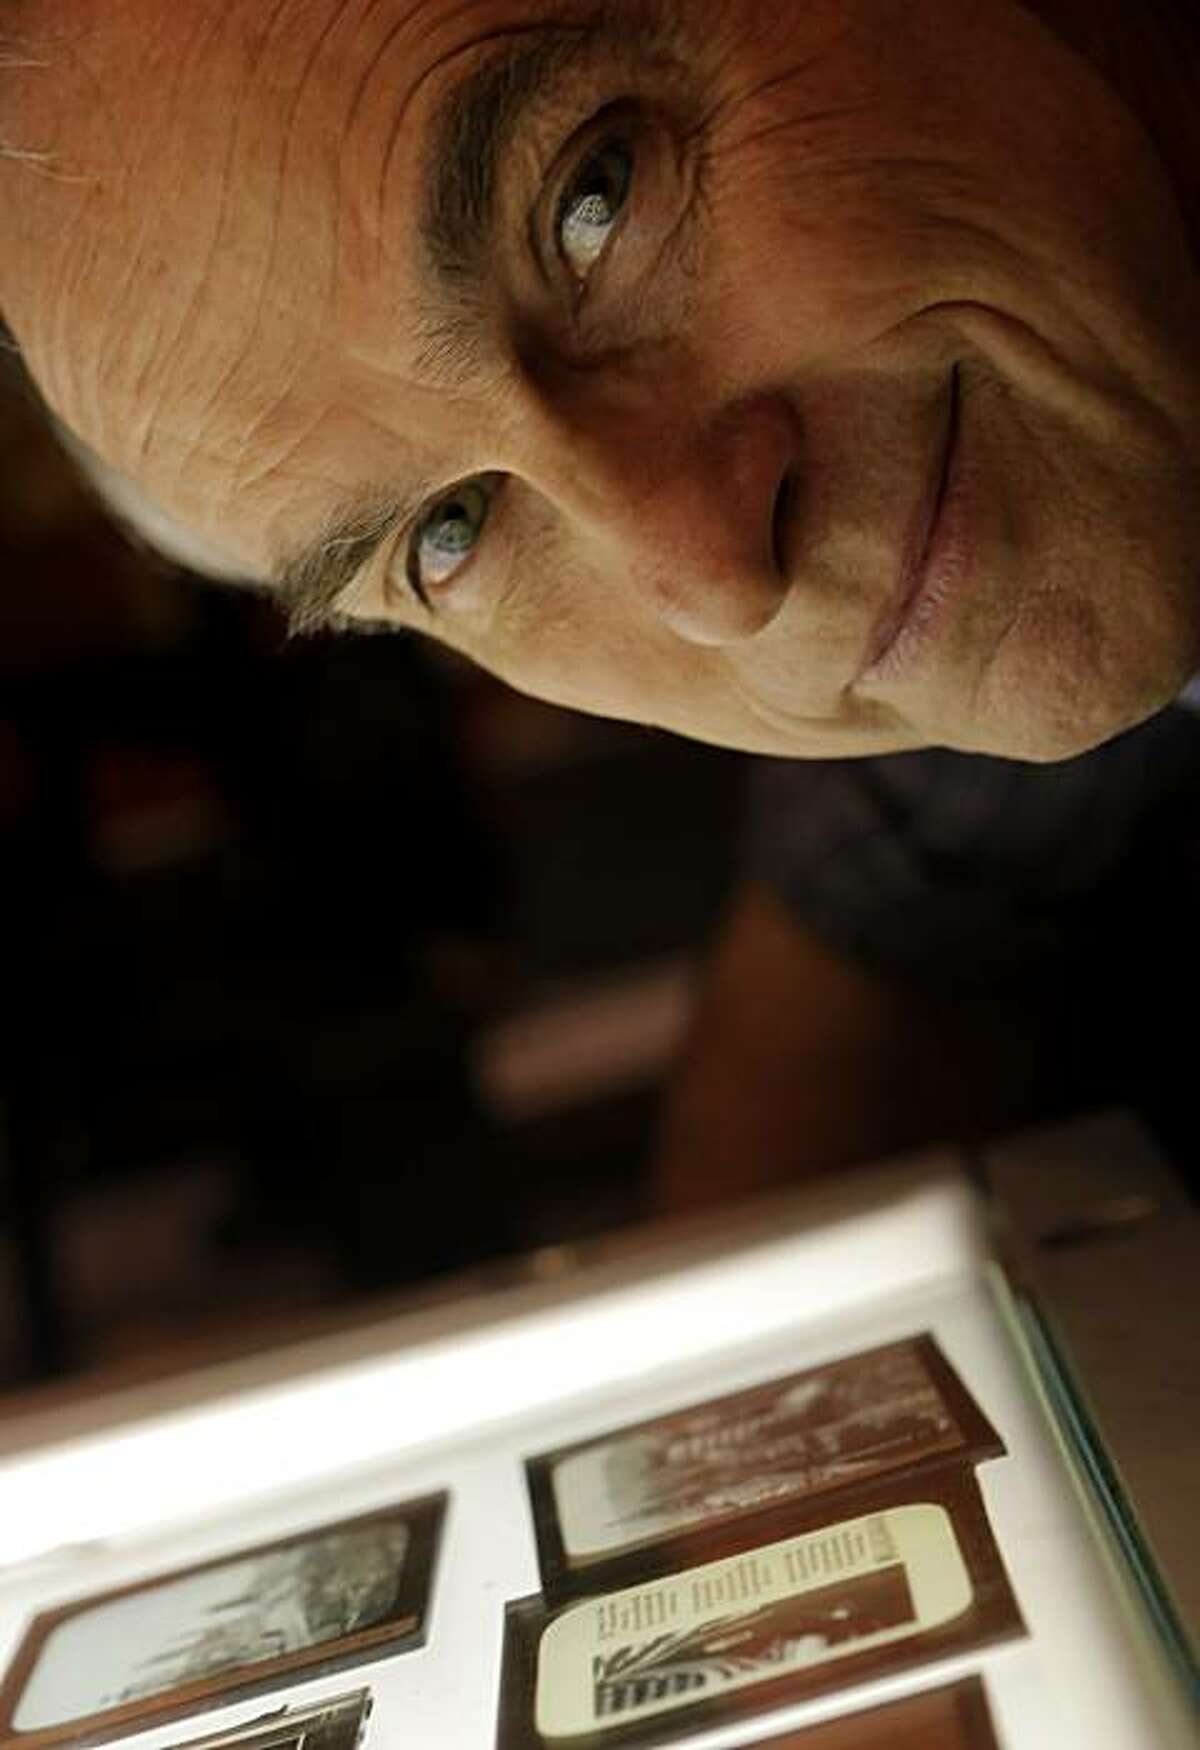 David Kiehn looks over the old glass negatives from San Francisco from 1906 at the the Niles Essanay Silent Film Museum, Monday Nov. 29, 2010, in Fremont, Calif.